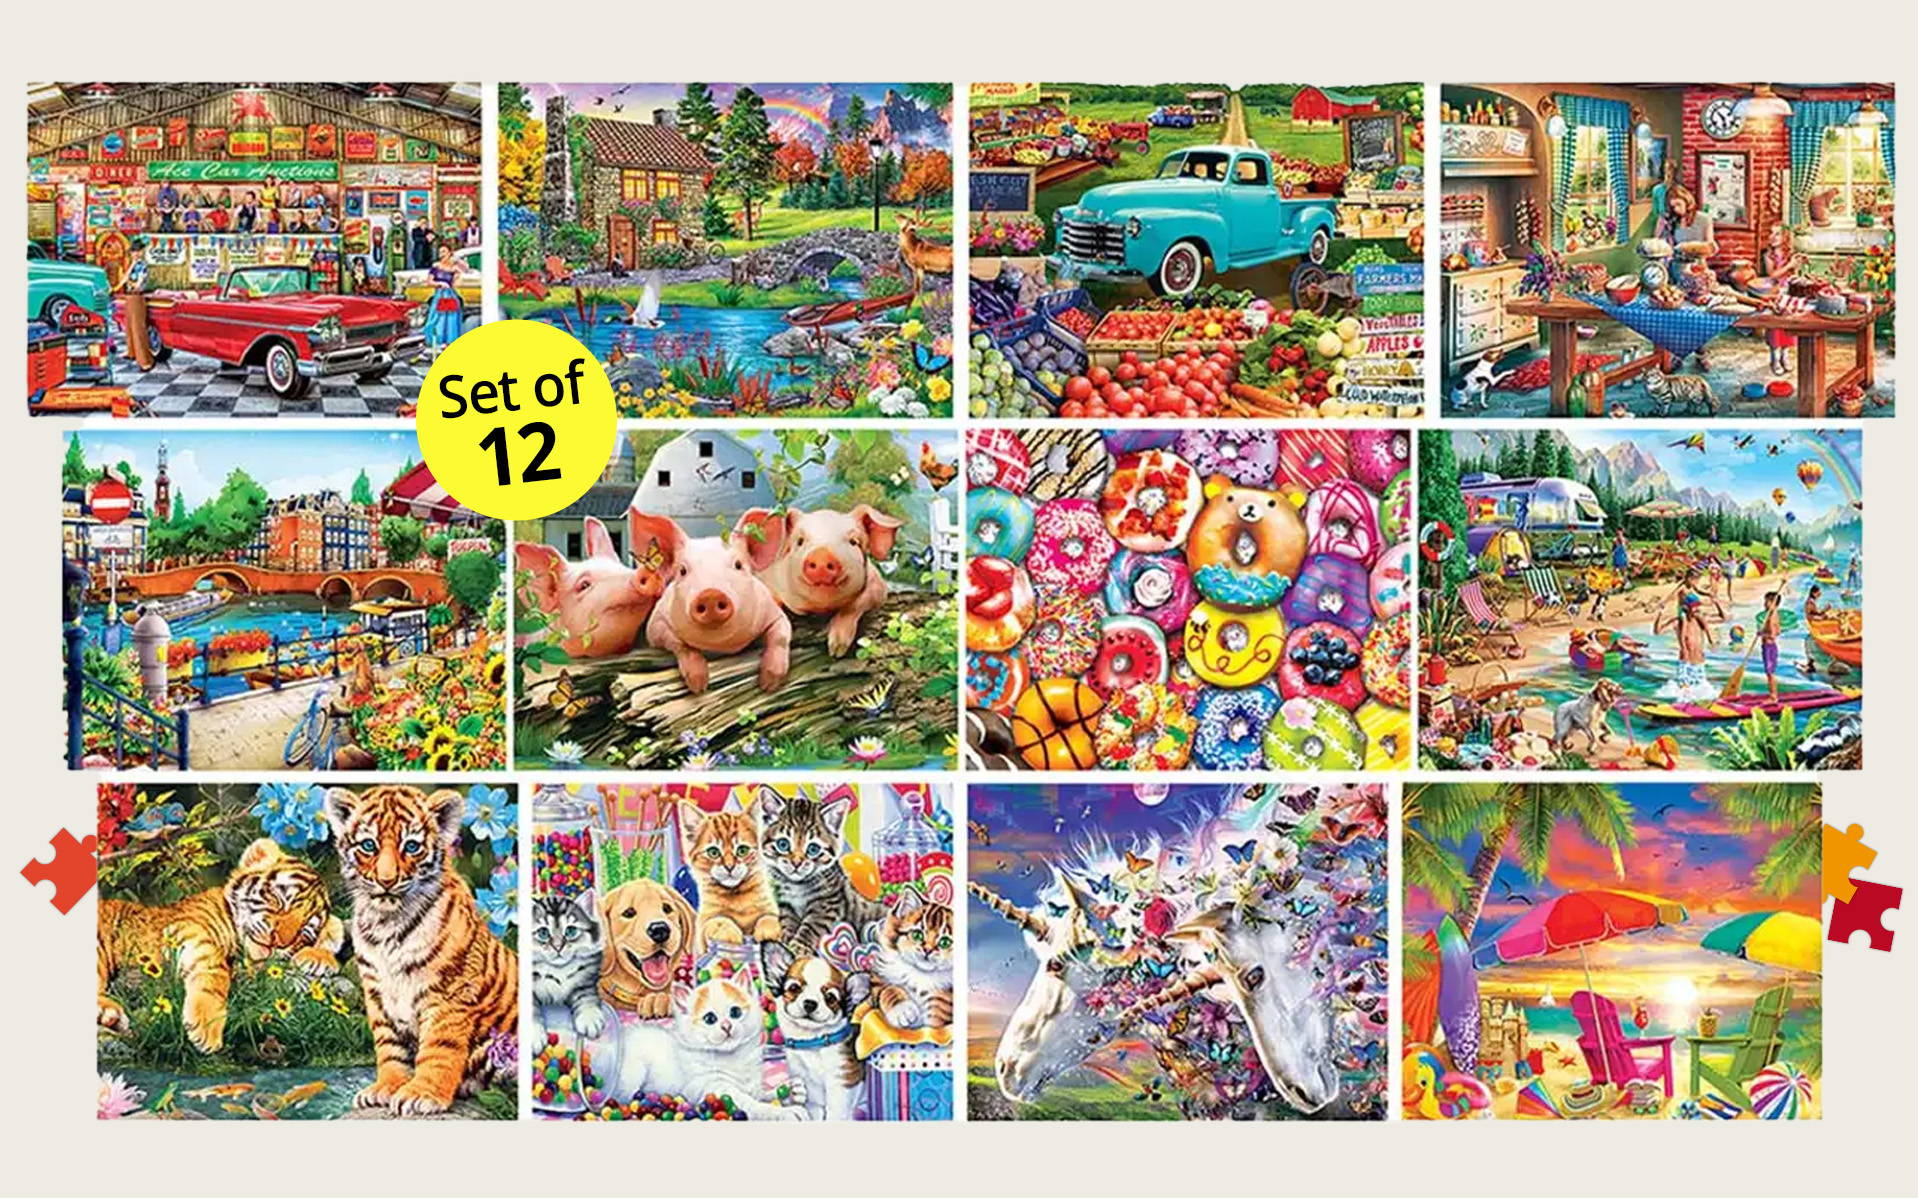 Text: Set of 12. Image: Masterpieces Puzzle Co Artist Gallery Bundle II Jigsaw Puzzle.